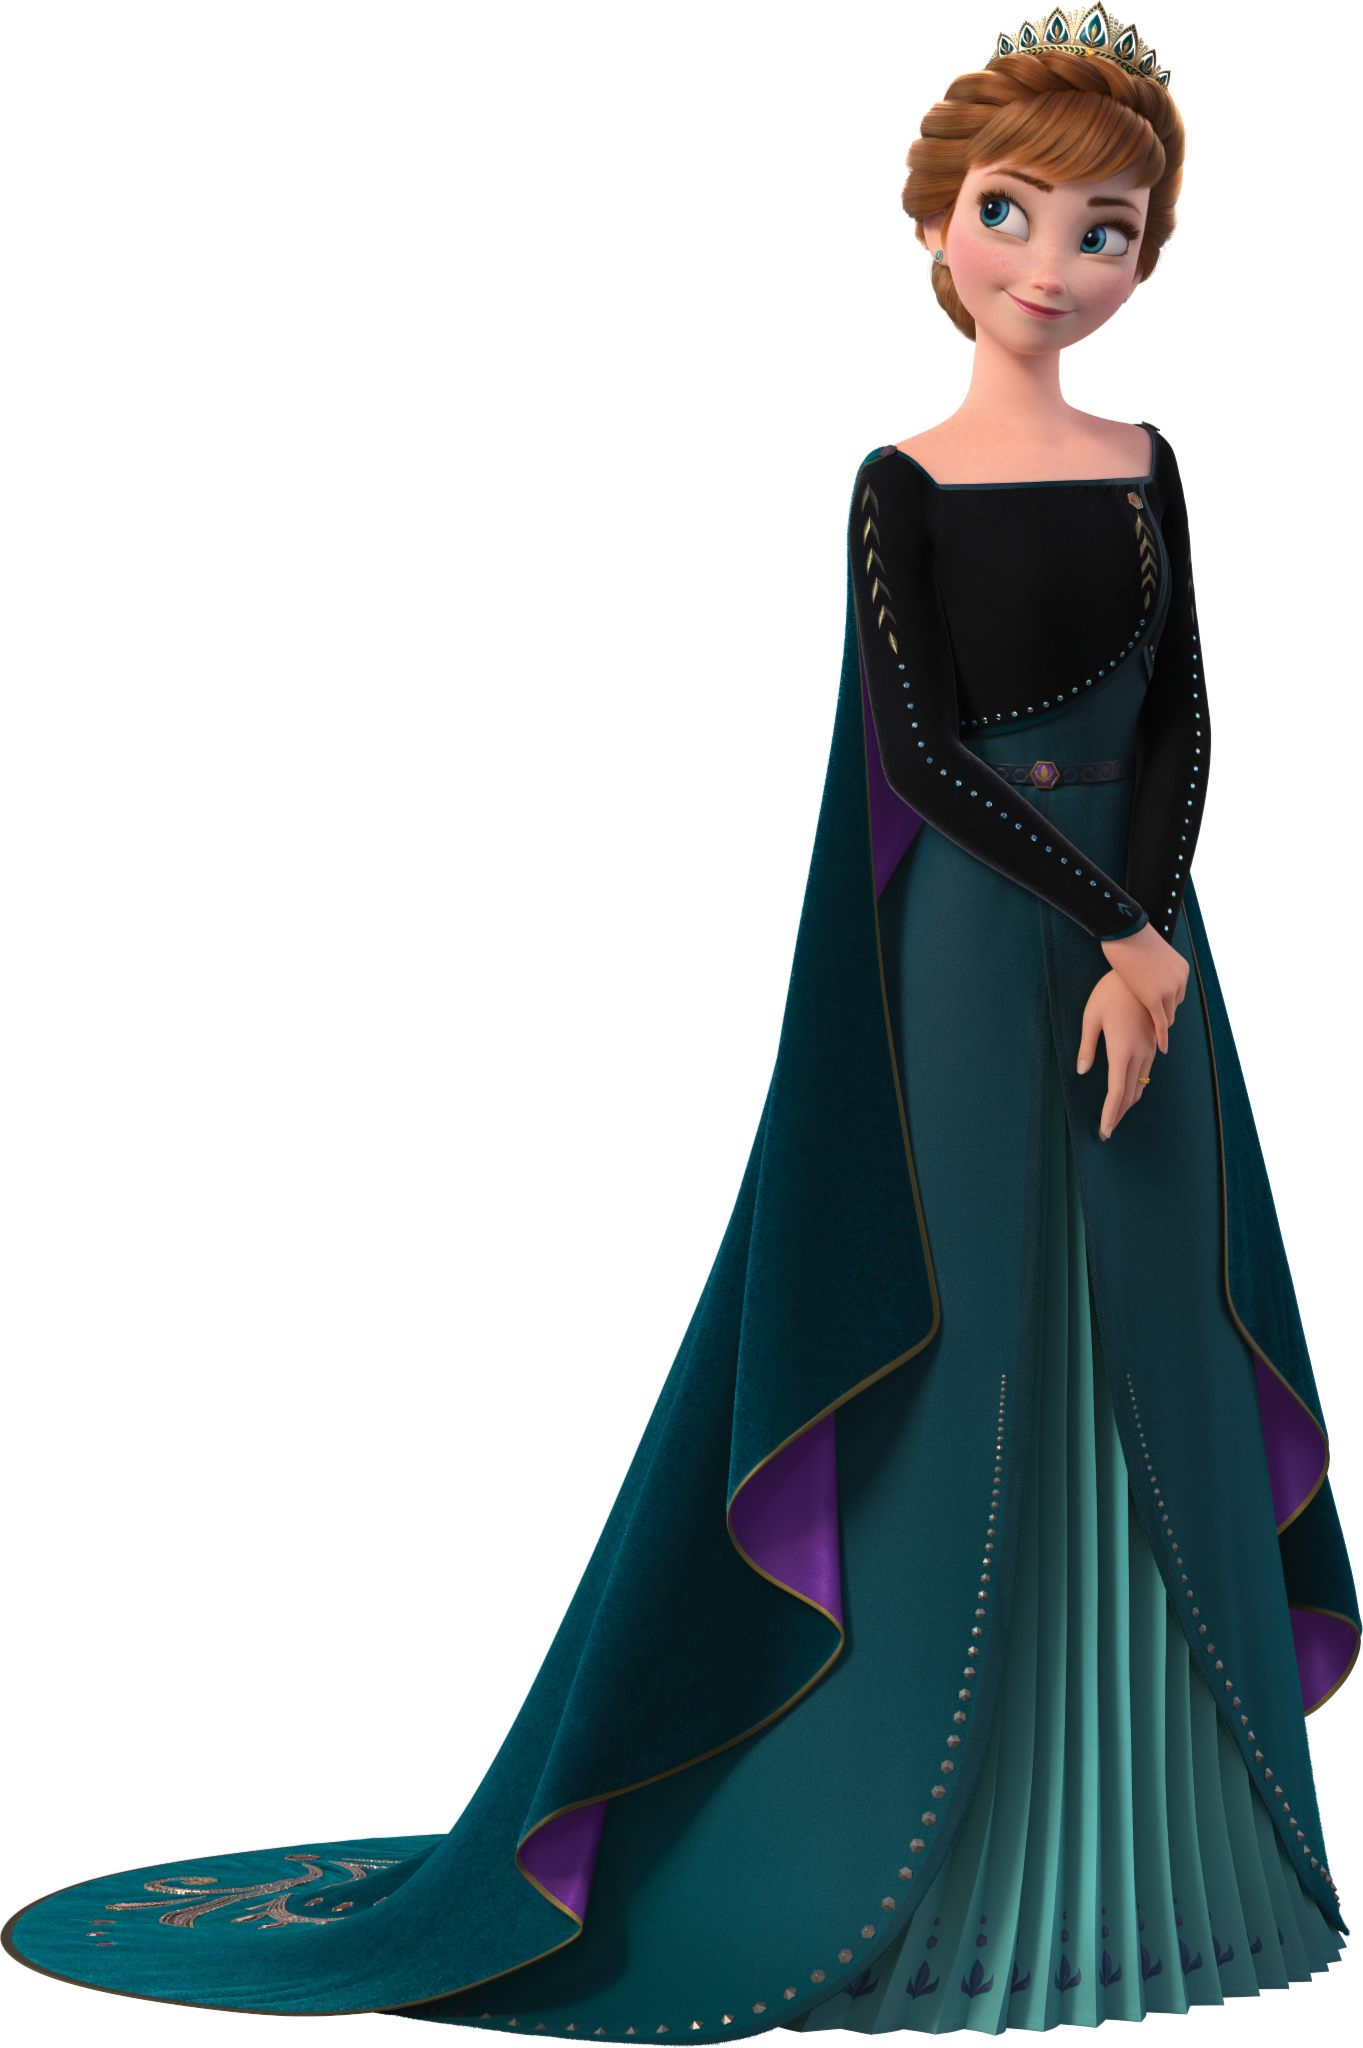 Queen Anna Of Arendelle Tools Of The Star Wikia Fandom